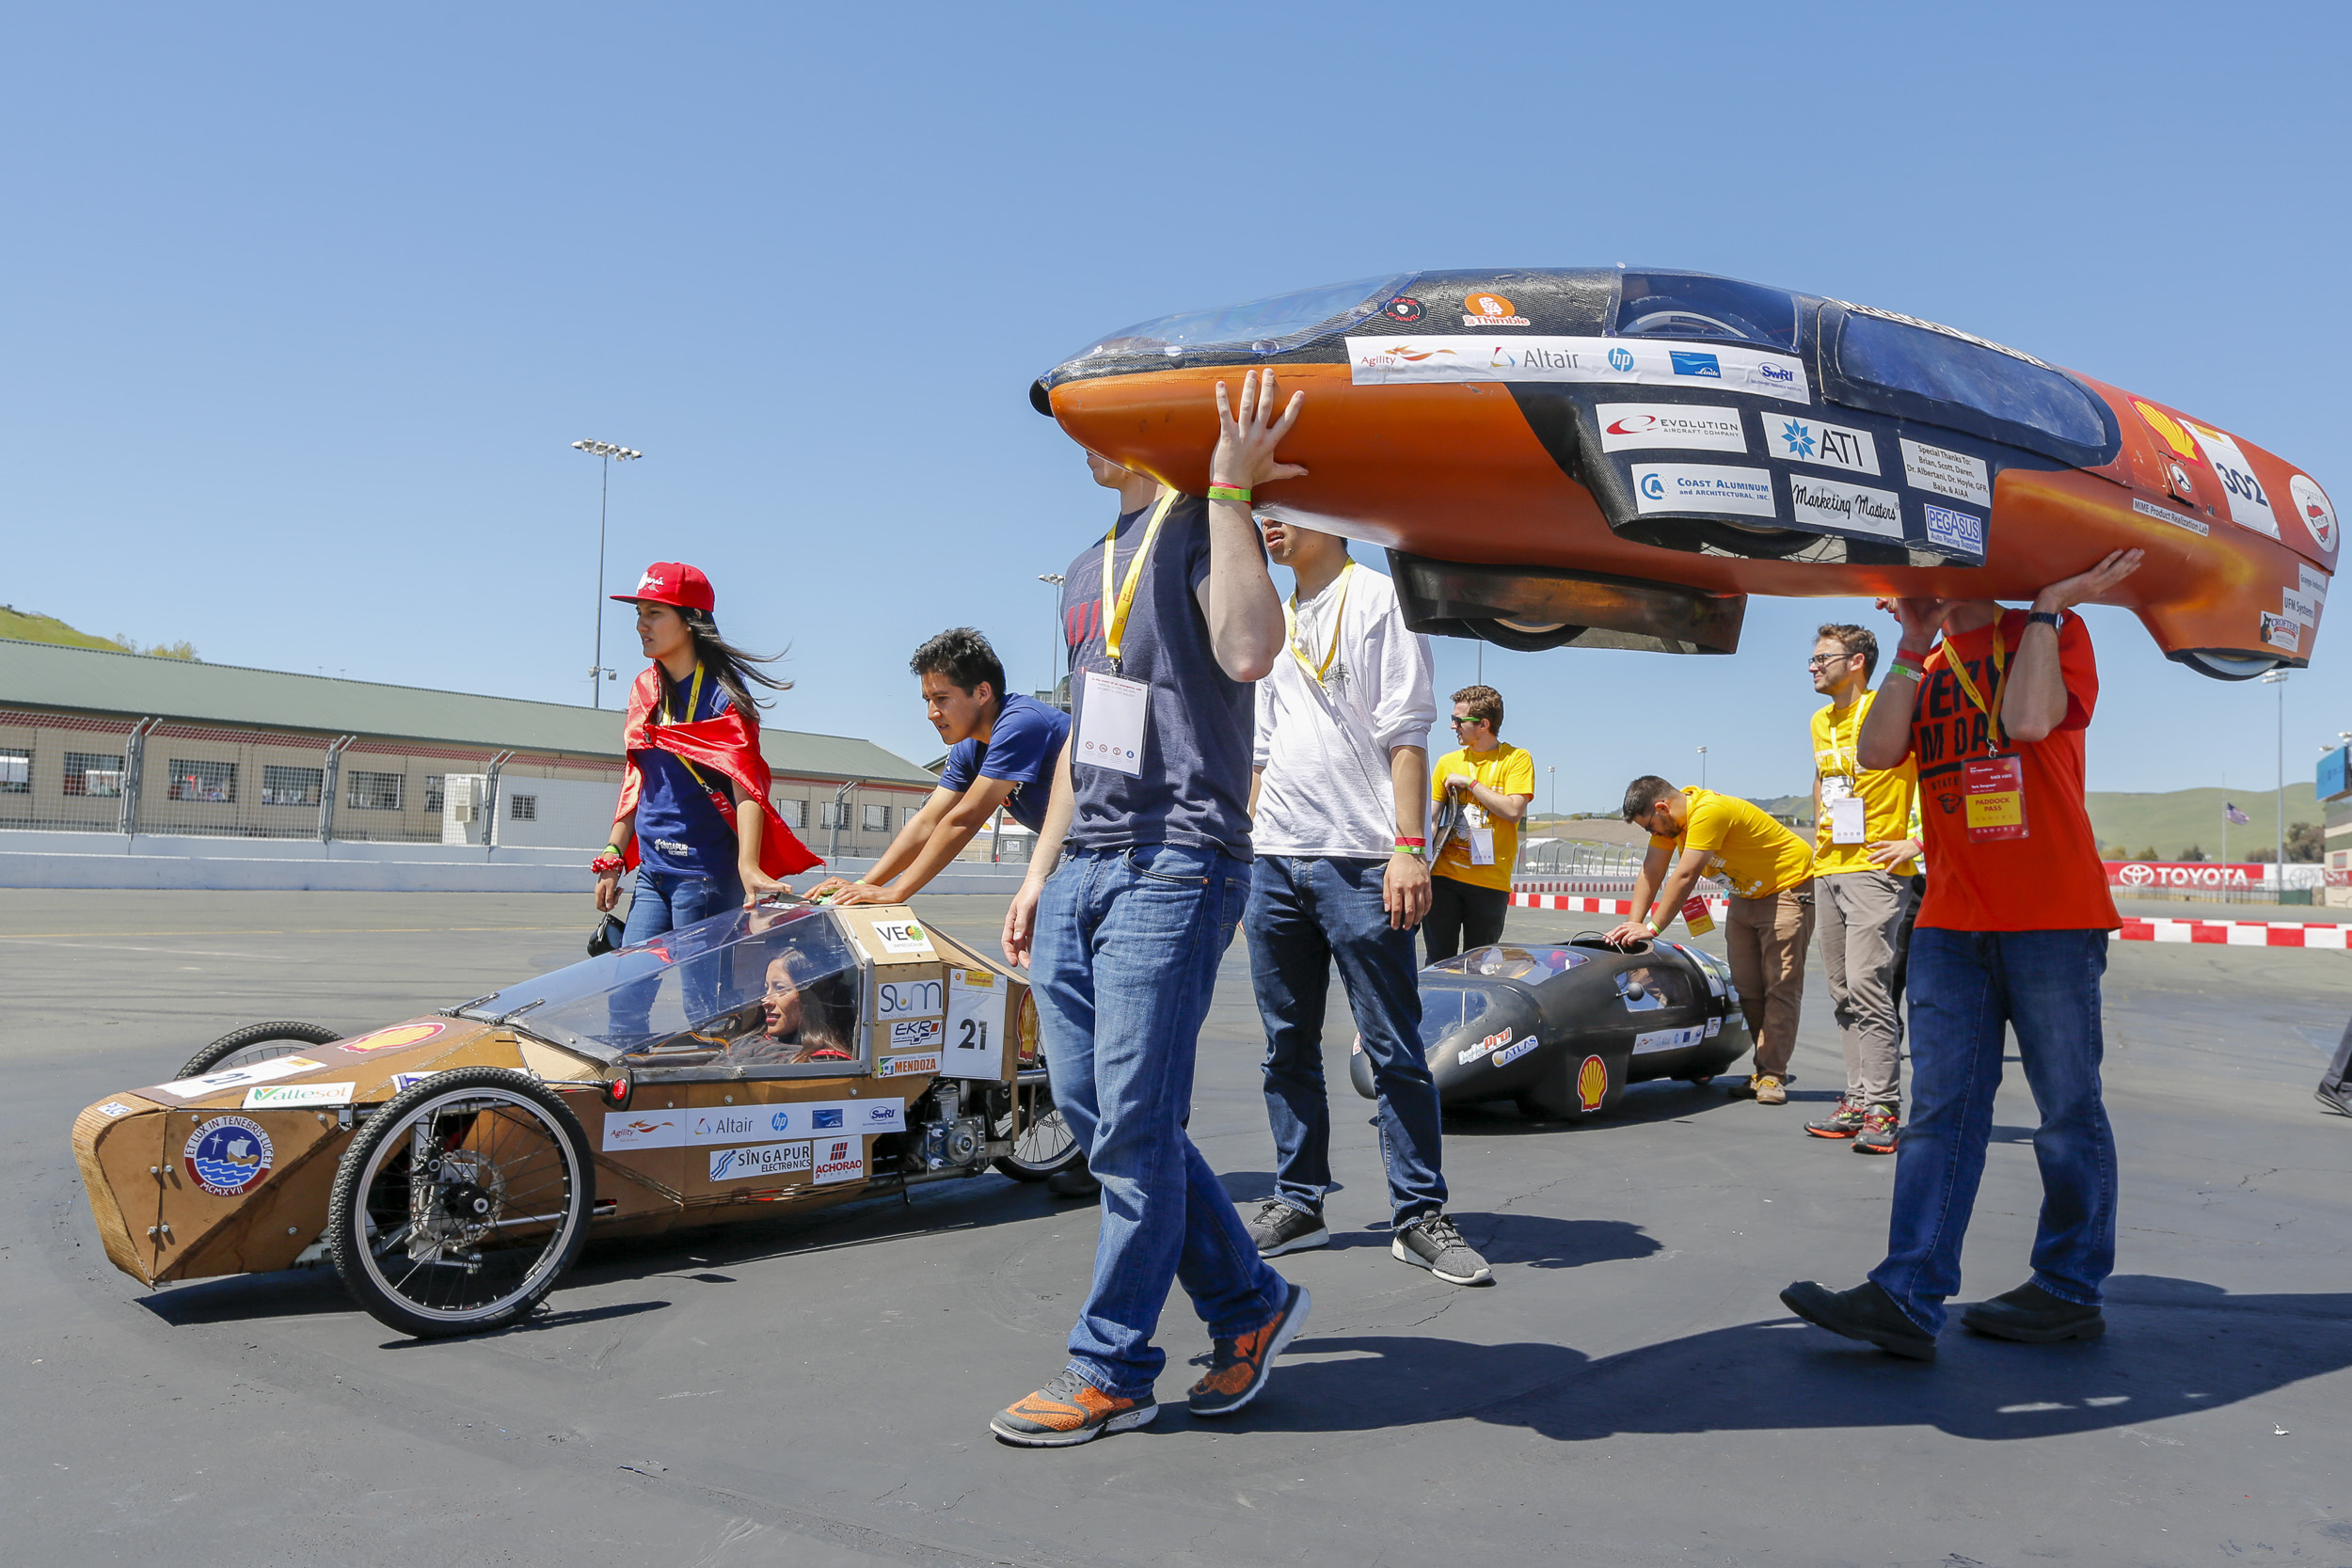  Team OSU Beavers with their vehicle the Beaver Bolt,&nbsp; #302, &nbsp;from Oregon State University, Corvallis, Oregon, United States, competing under the Prototype - Battery Electric category, and Team SEMA PUCP with their vehicle the PUCP 1,&nbsp;